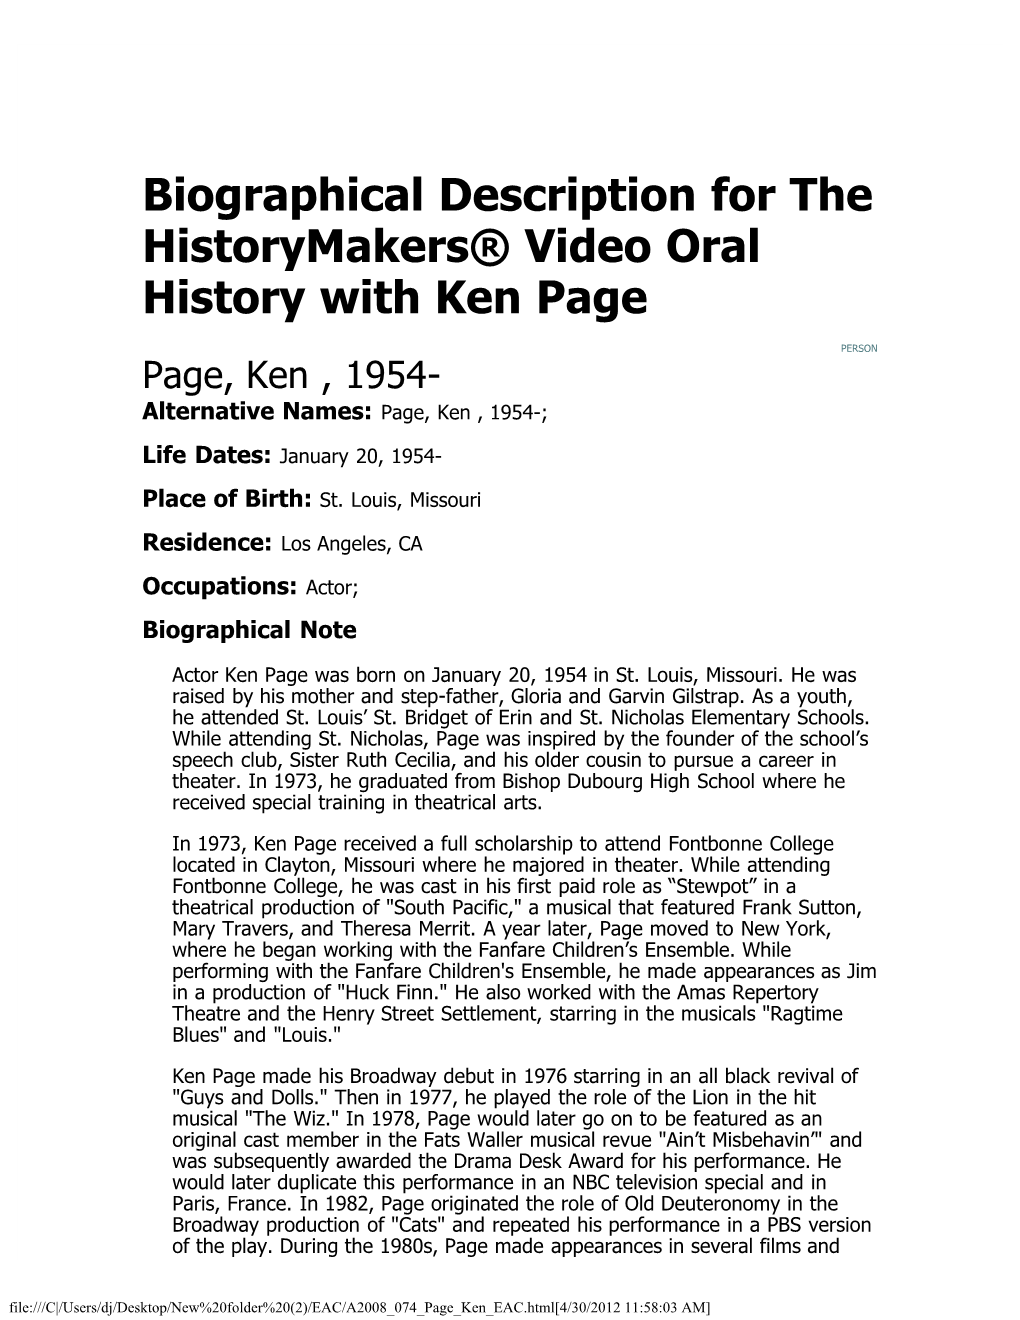 Biographical Description for the Historymakers® Video Oral History with Ken Page